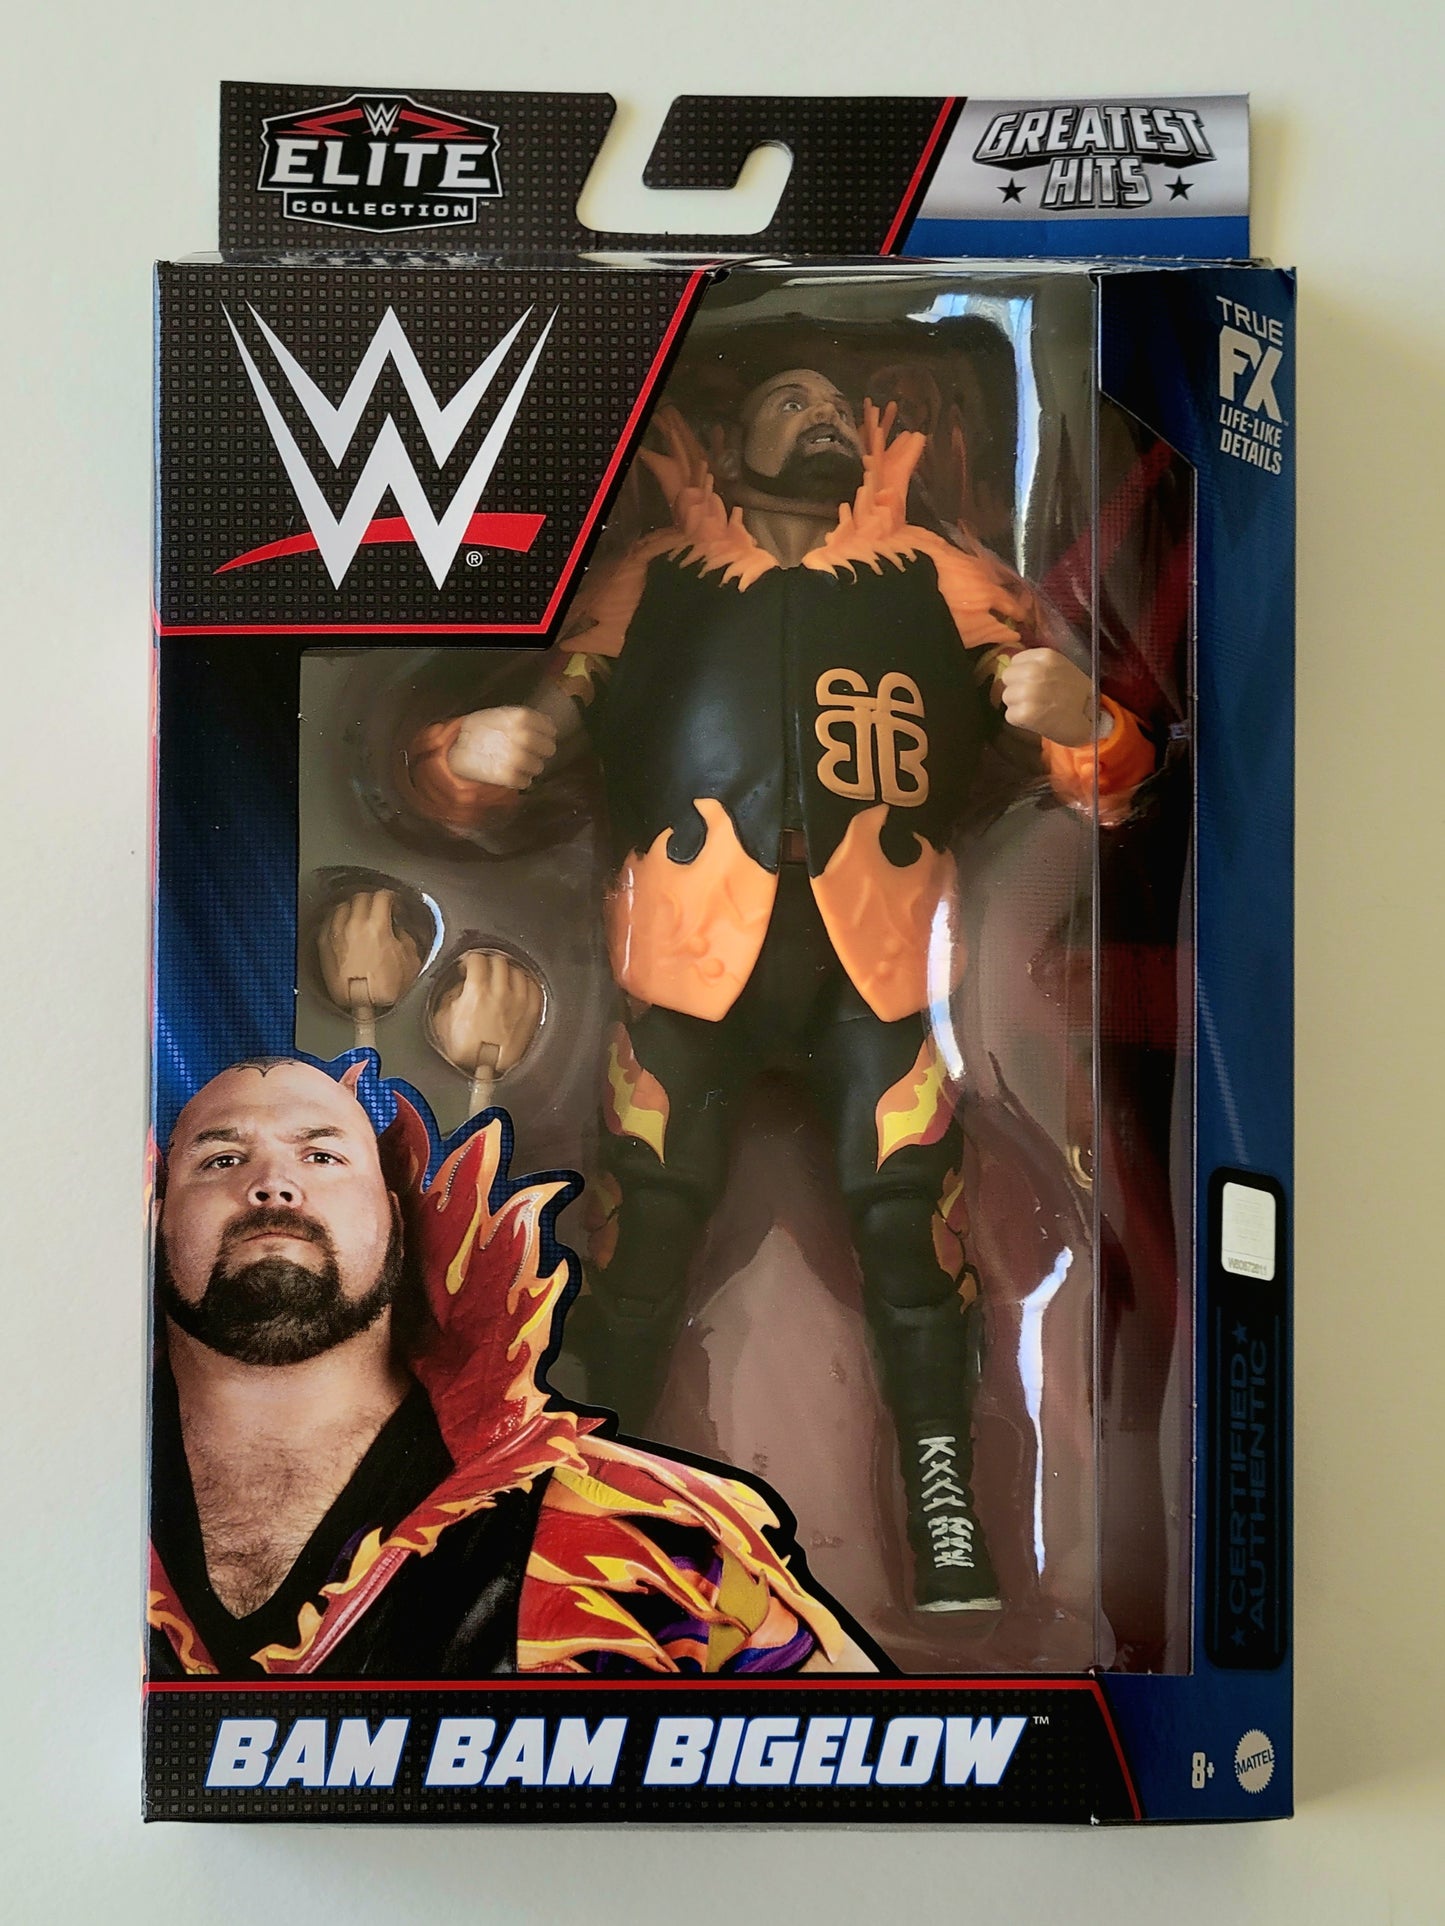 WWE Elite Collection Greatest Hits 2022 Bam Bam Bigelow Action Figure